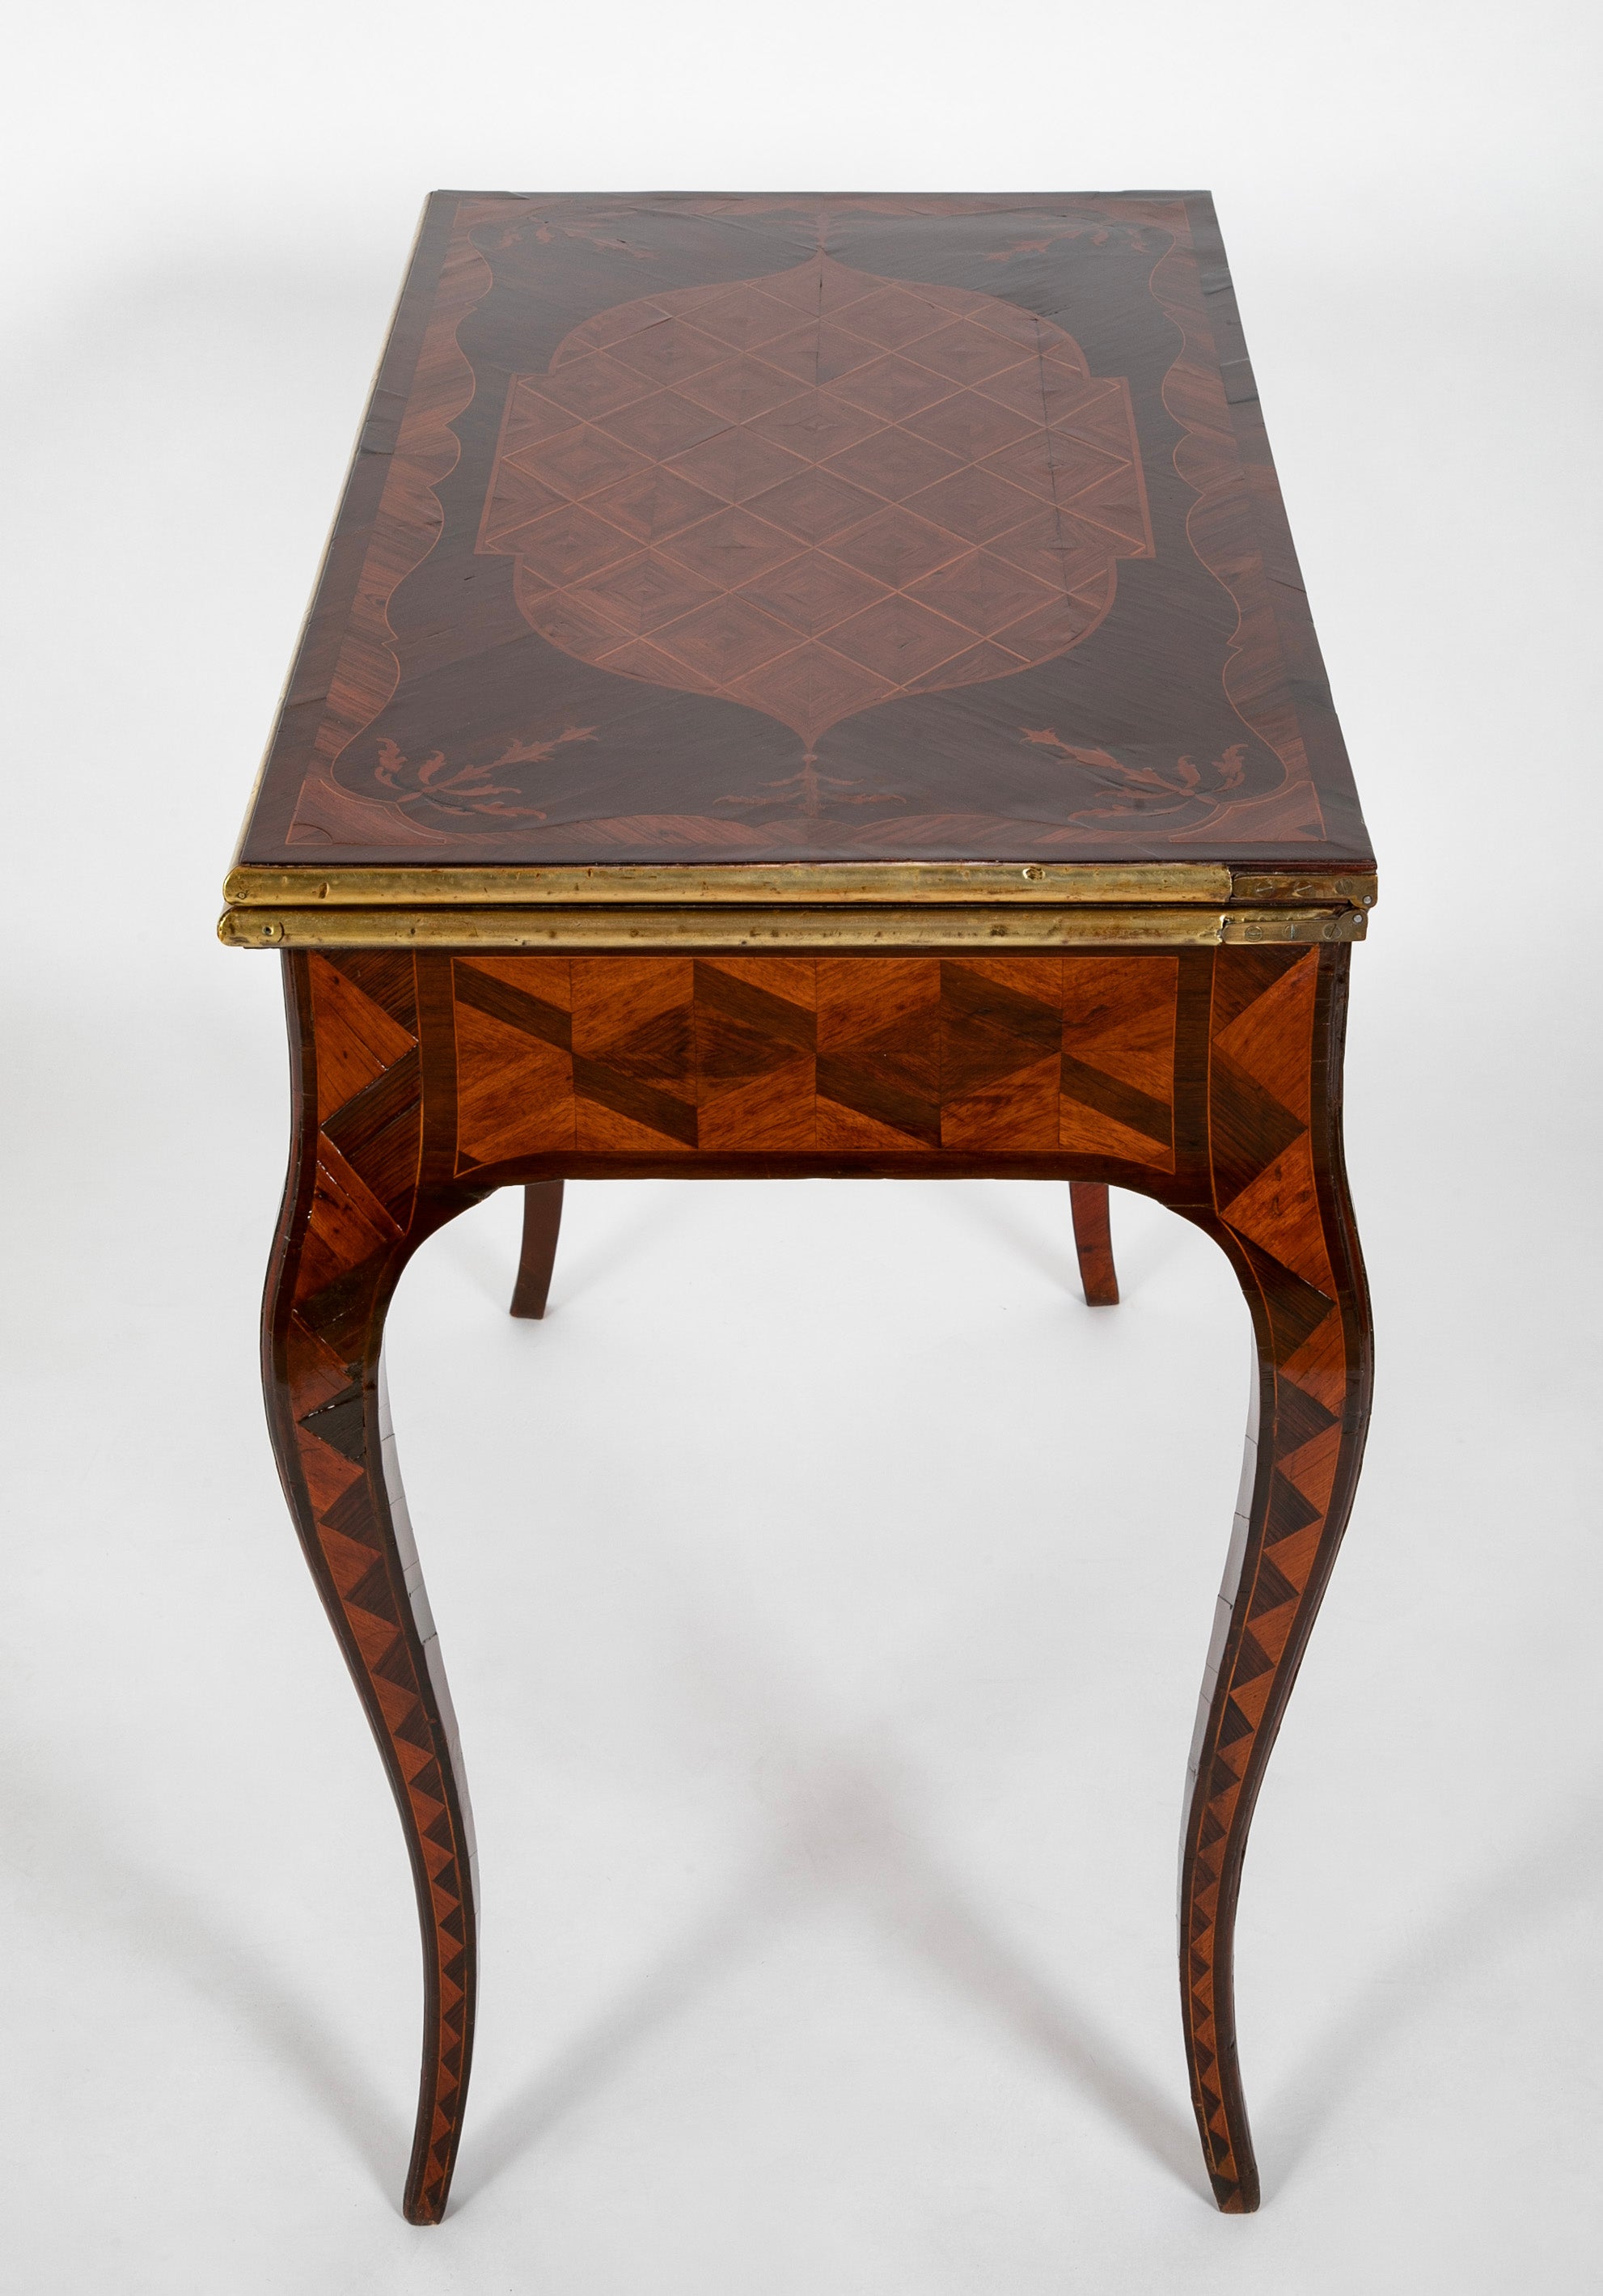 Important Late 18th Century Italian Marquetry Game Table